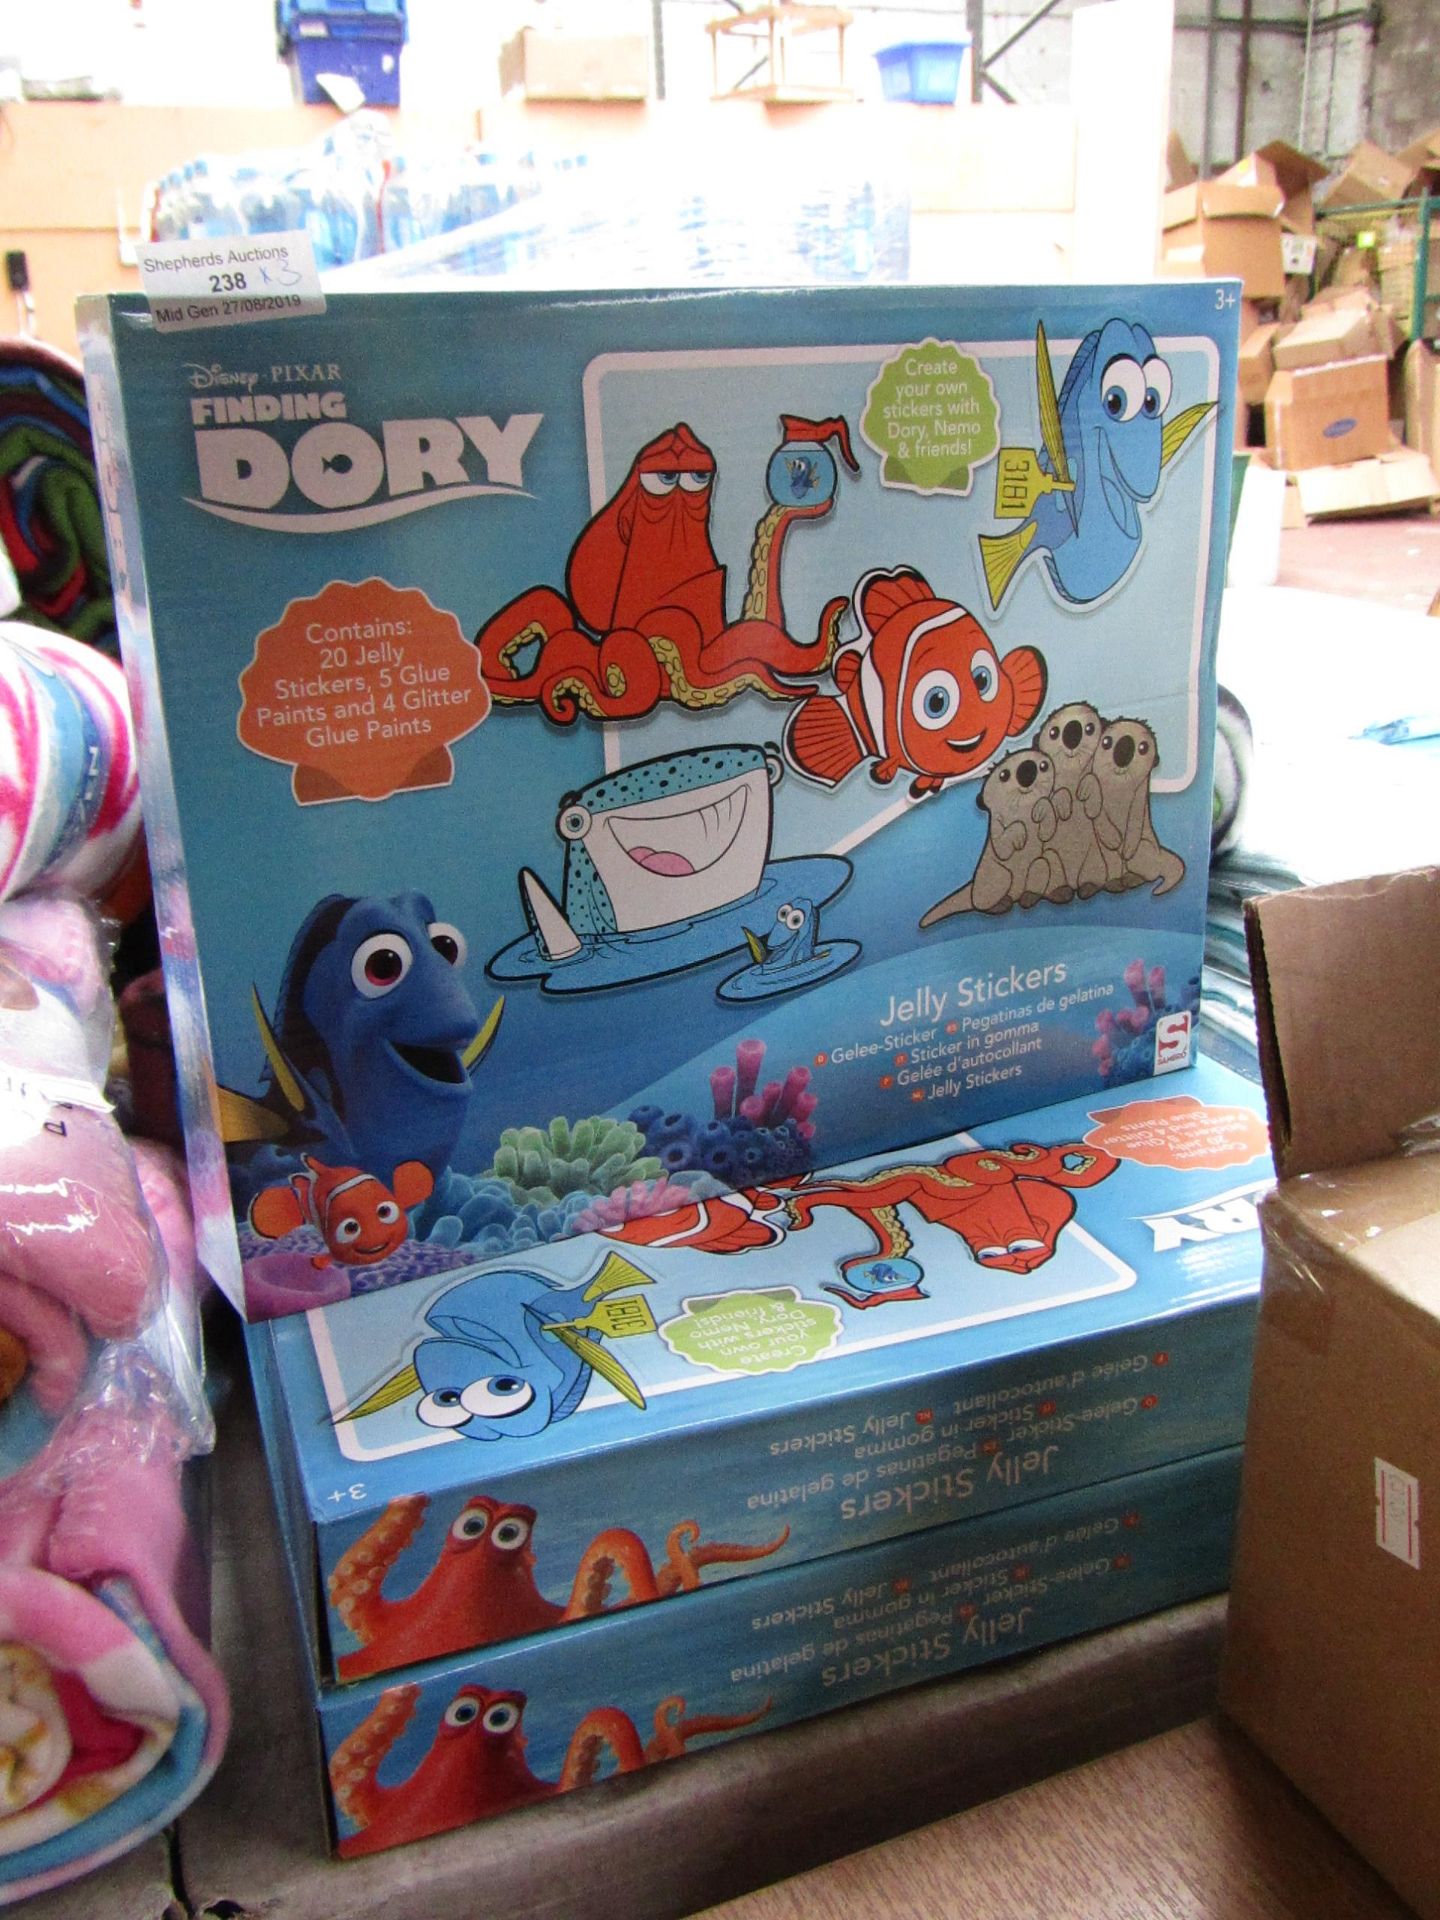 3 x Finding Dory Jelly Sticker Sets Create Your Own Stickers new & boxed